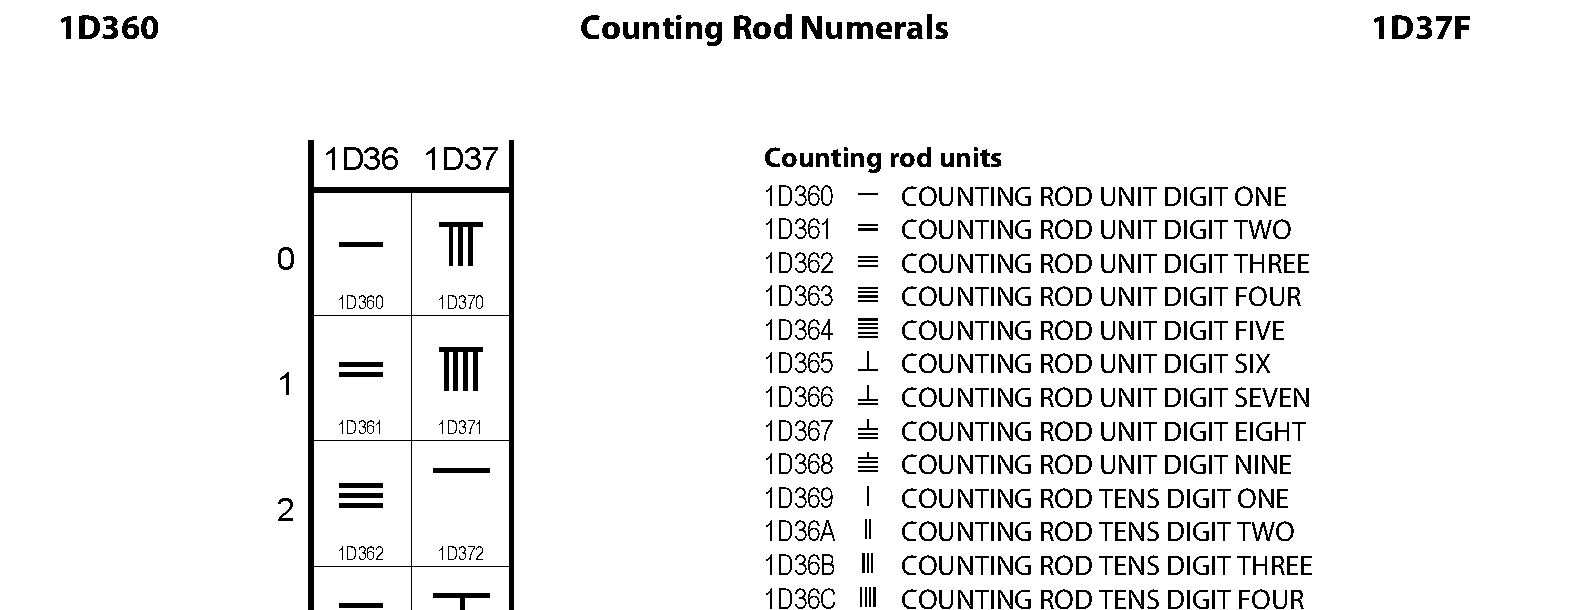 Unicode - Counting Rod Numerals